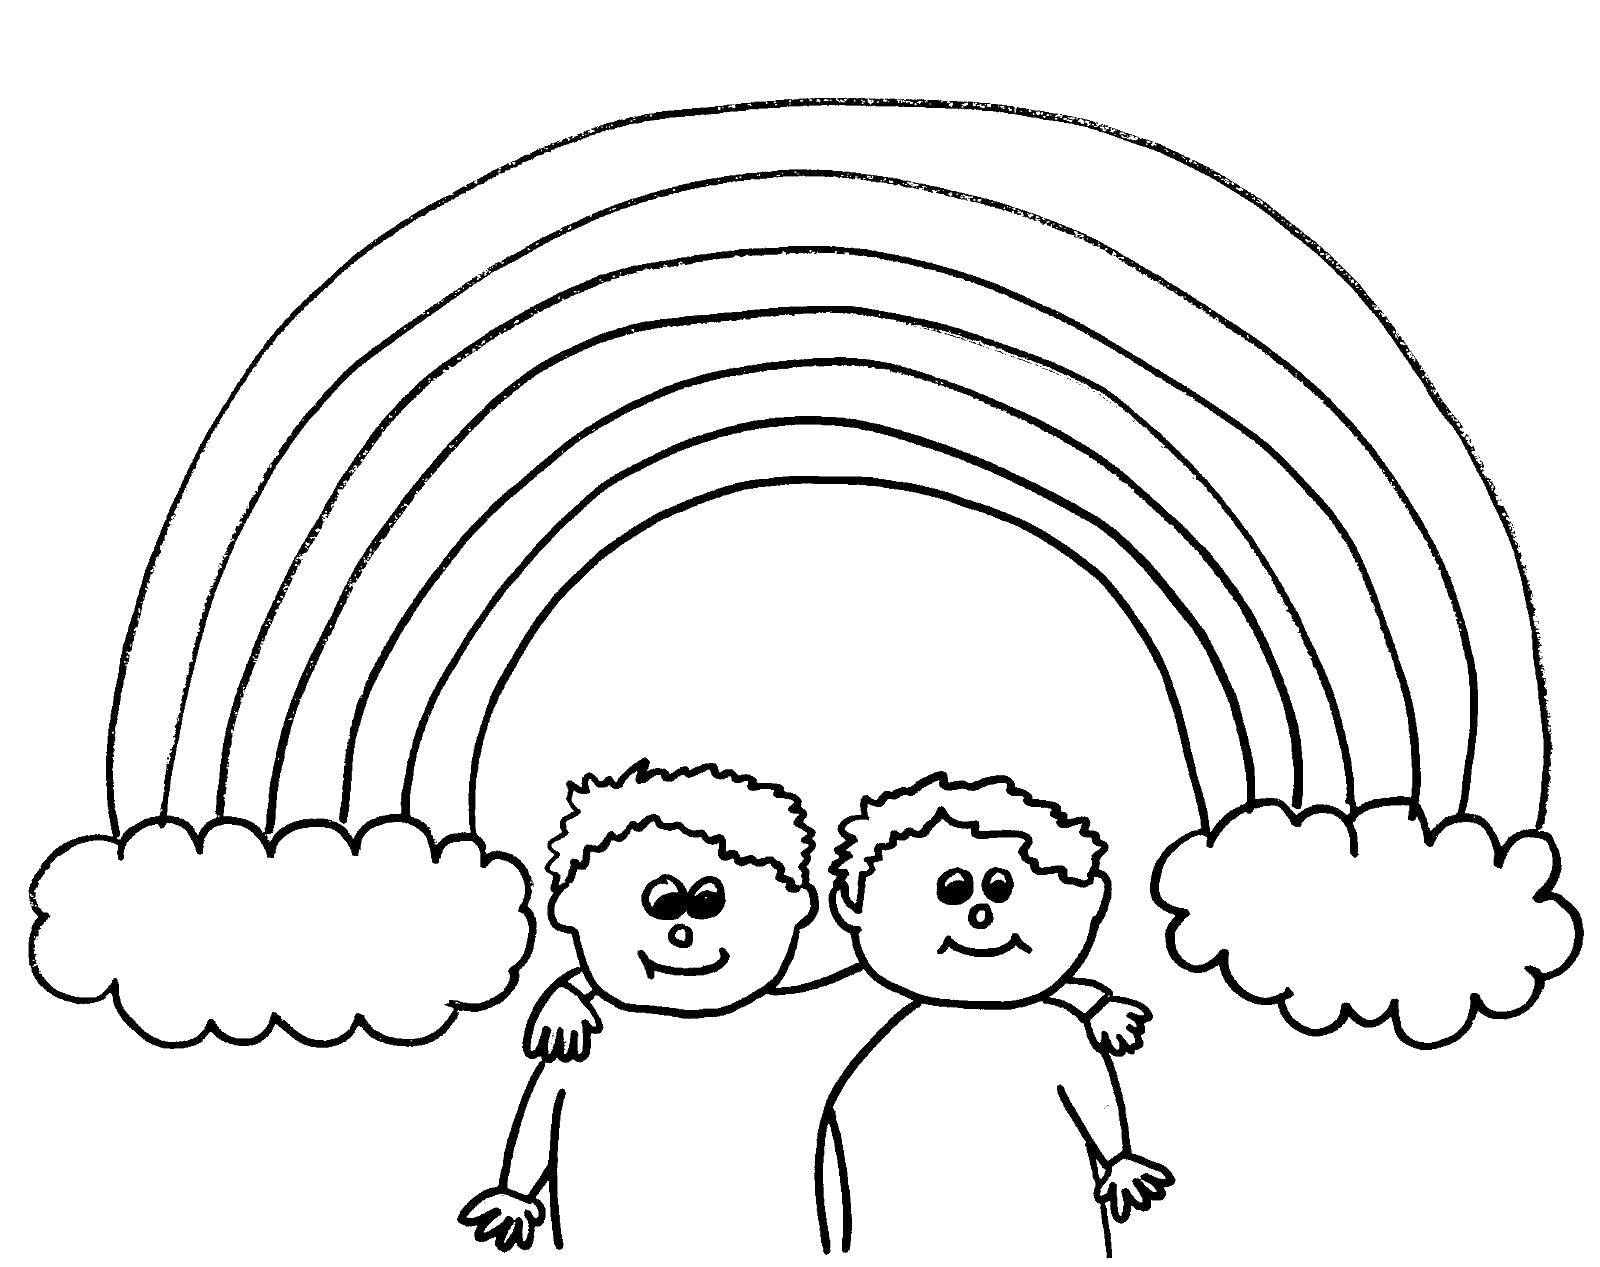 Coloring Two friends and rainbow. Category The rainbow. Tags:  rainbow, clouds, friends.